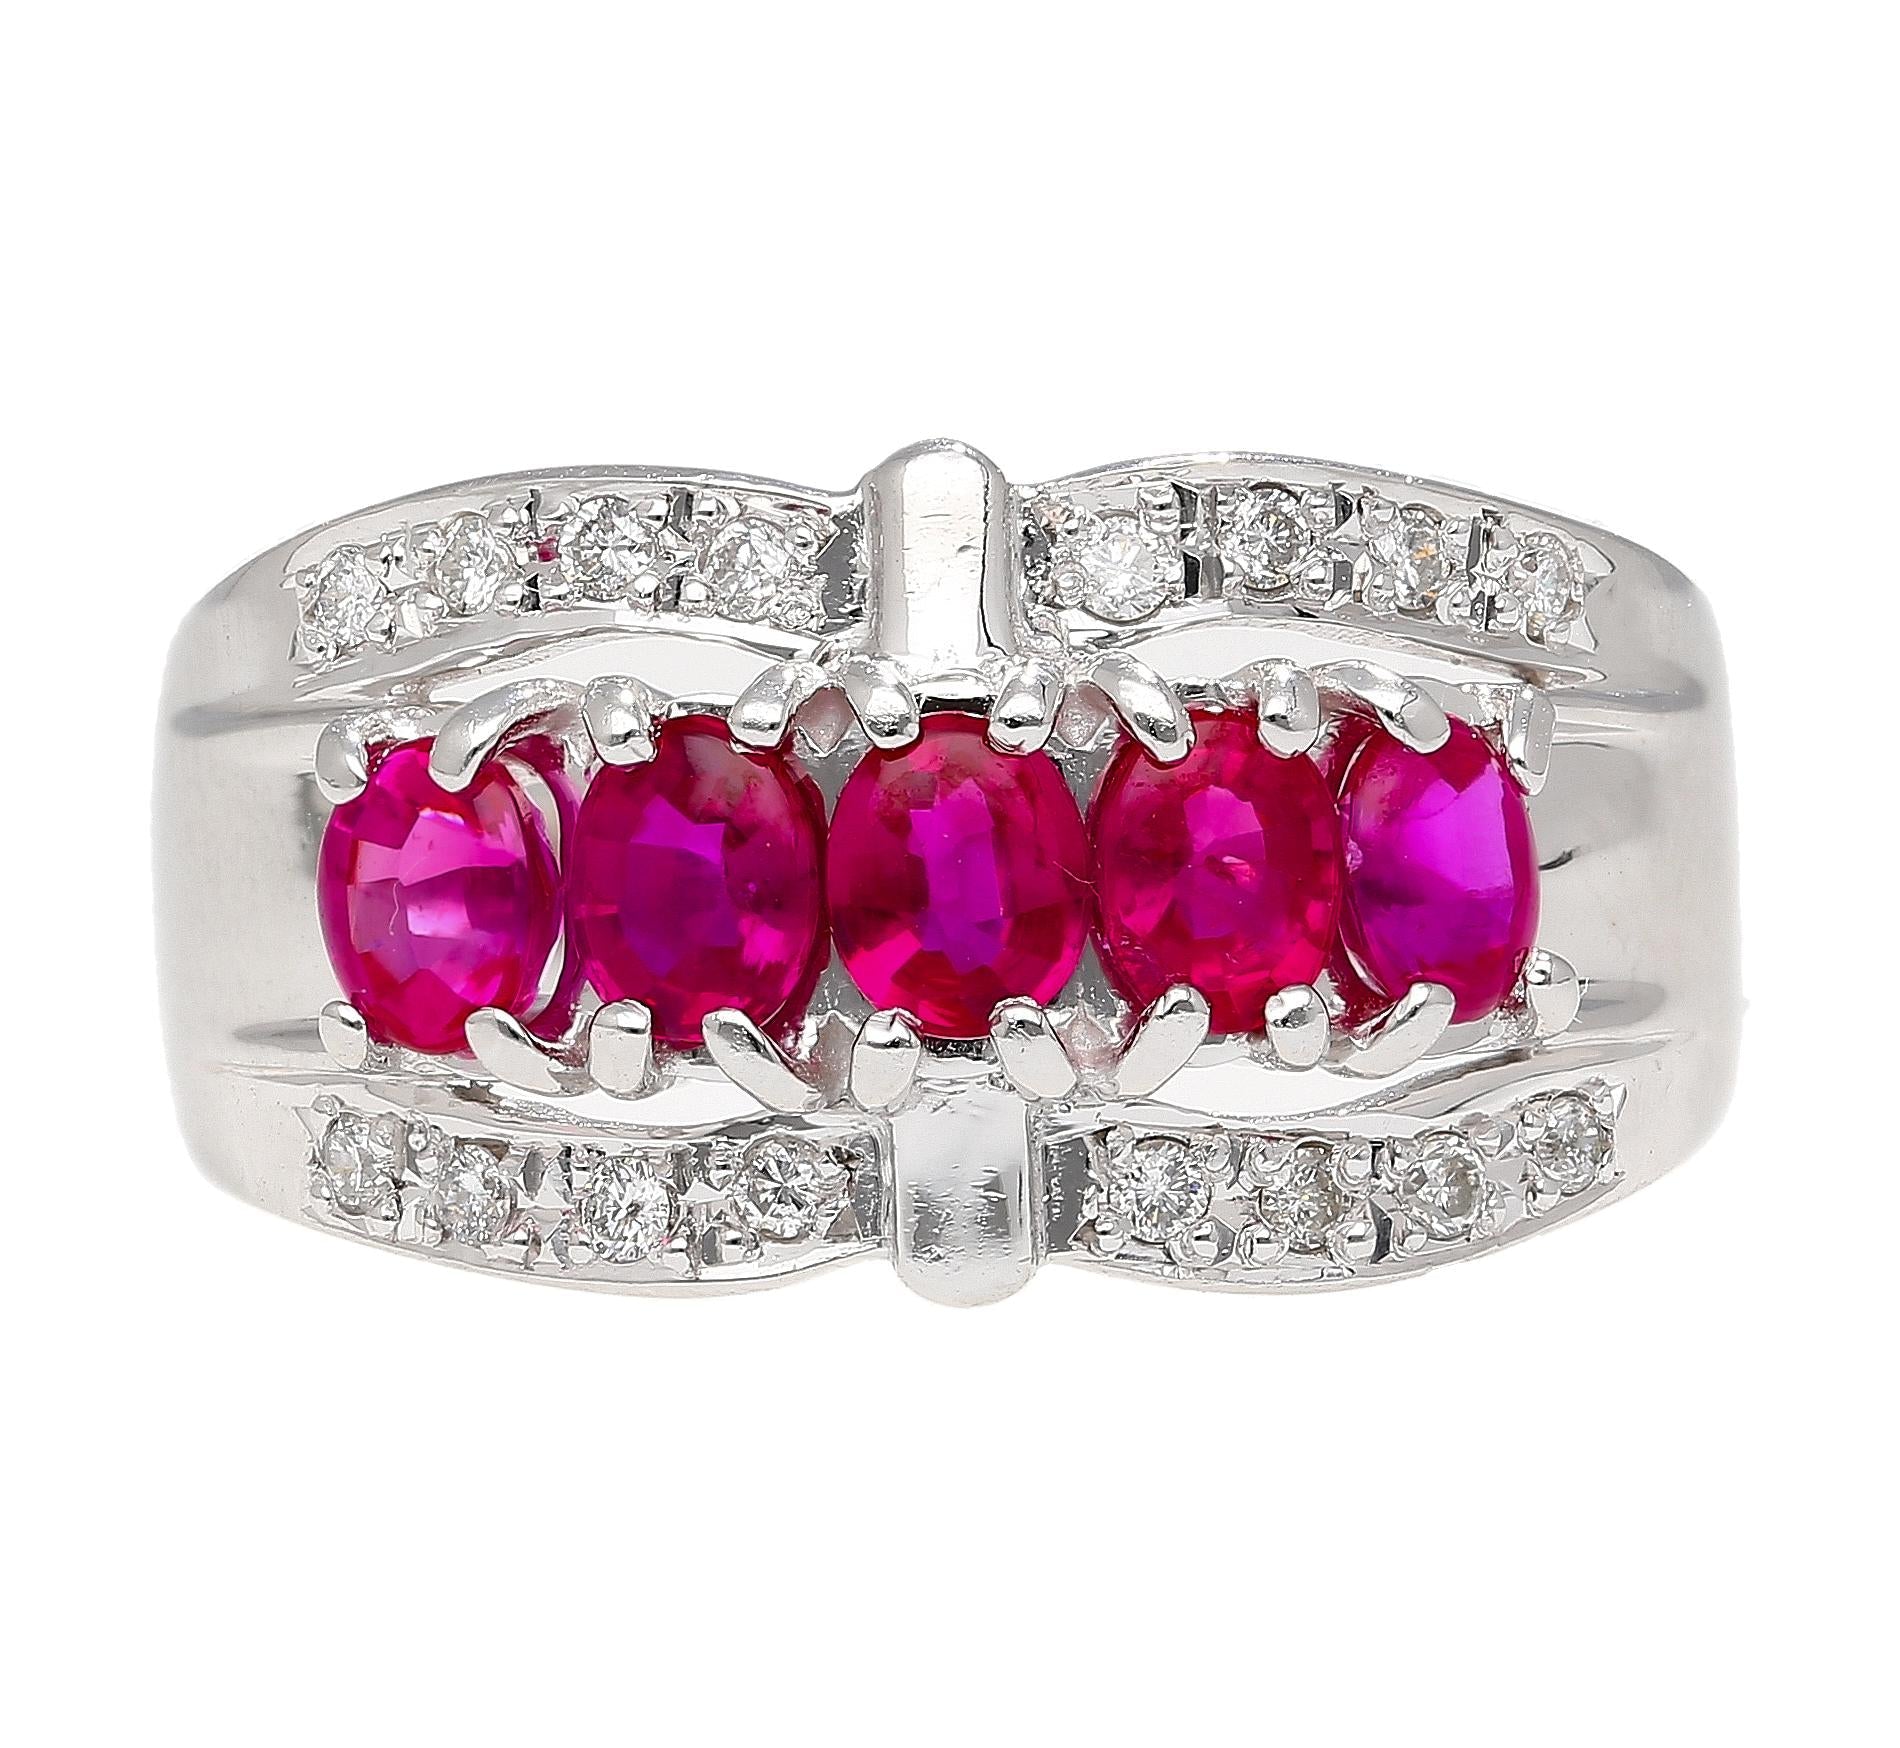 1.43 Carat Pinkish Red Ruby and Diamond Cluster Platinum Dome Ring